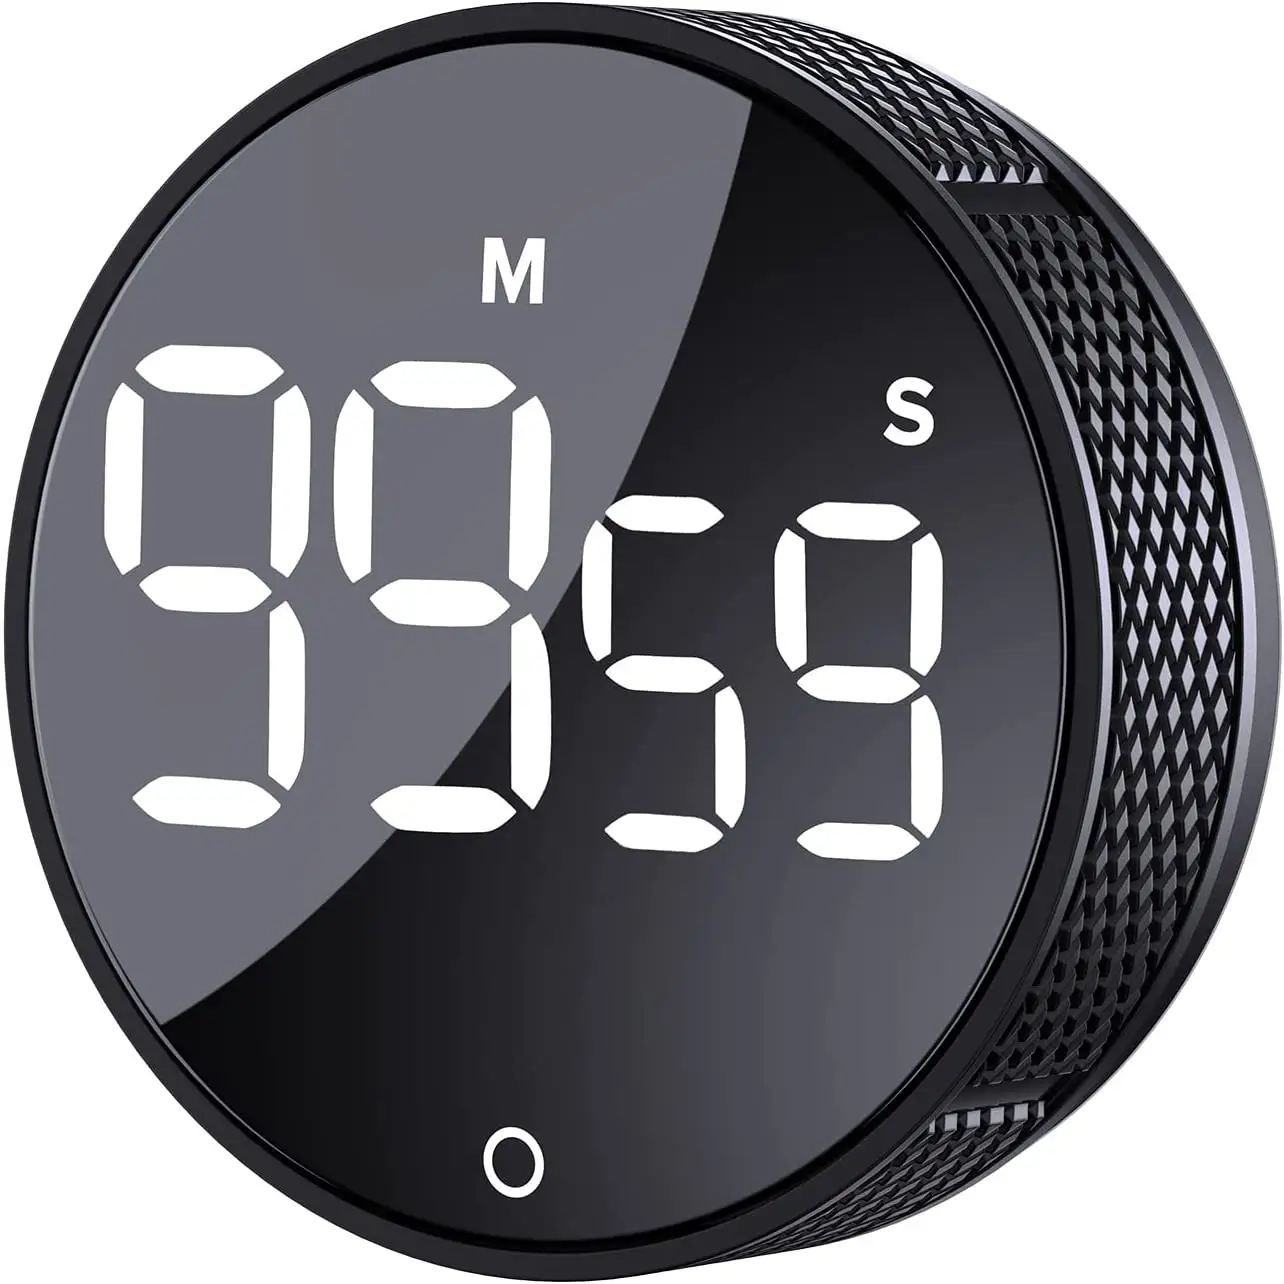 New Round Digital Timer with 3 Volume Levels LED Timer with Large LED Screen Magnetic Kitchen Timer